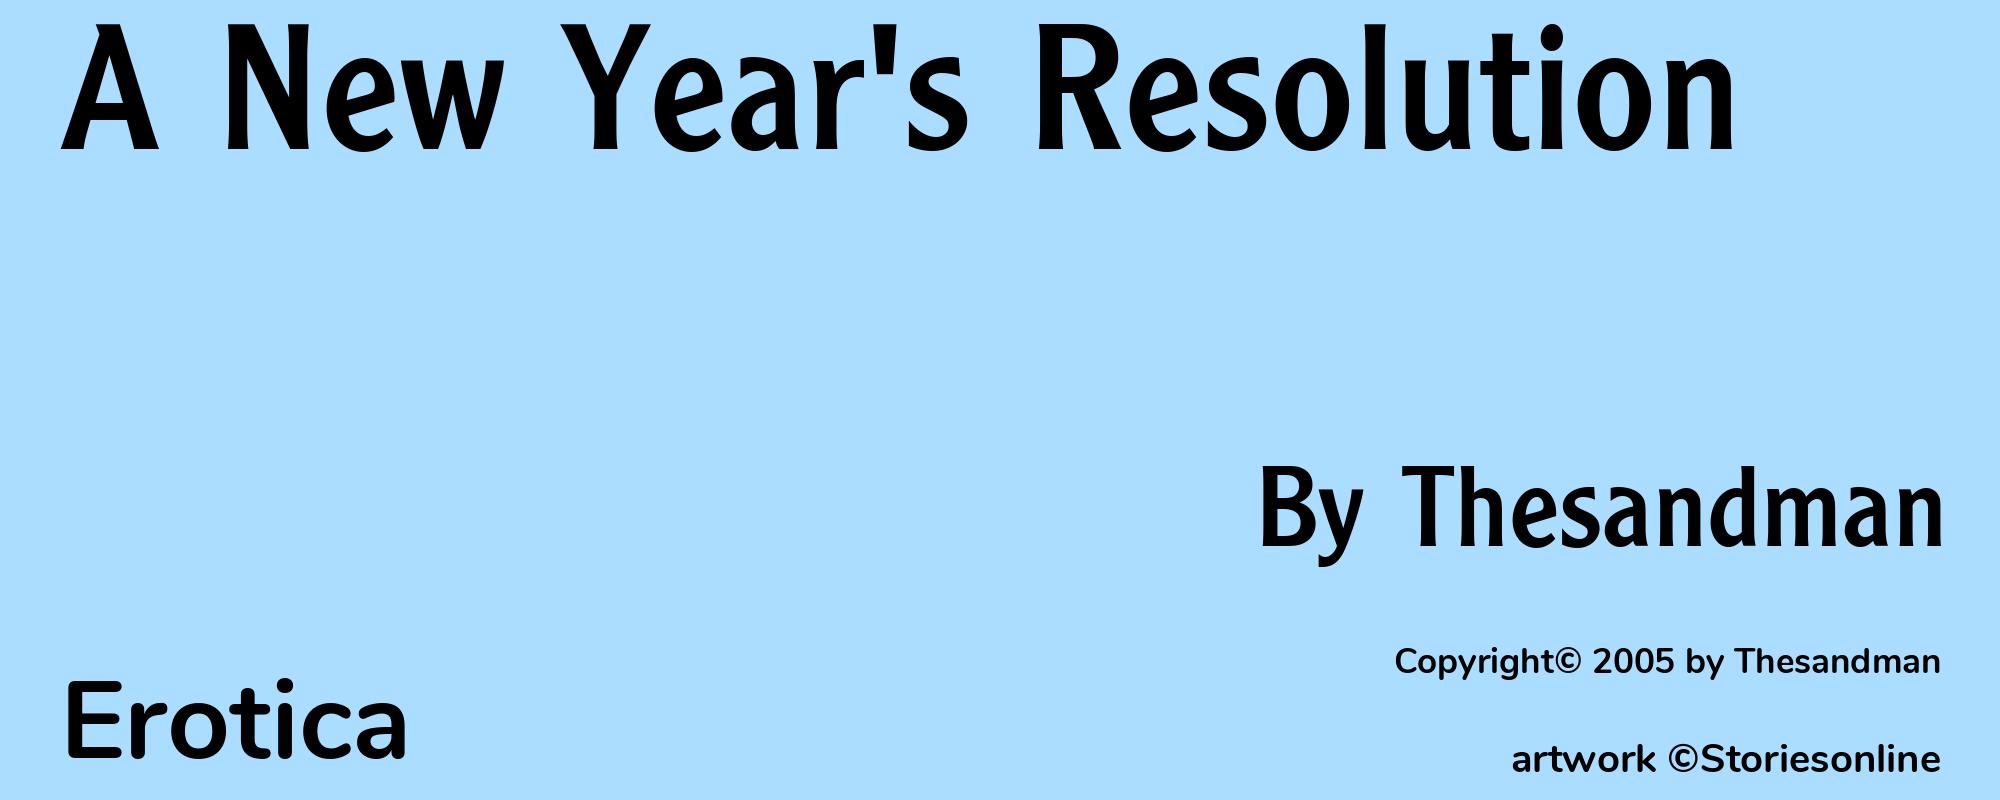 A New Year's Resolution - Cover